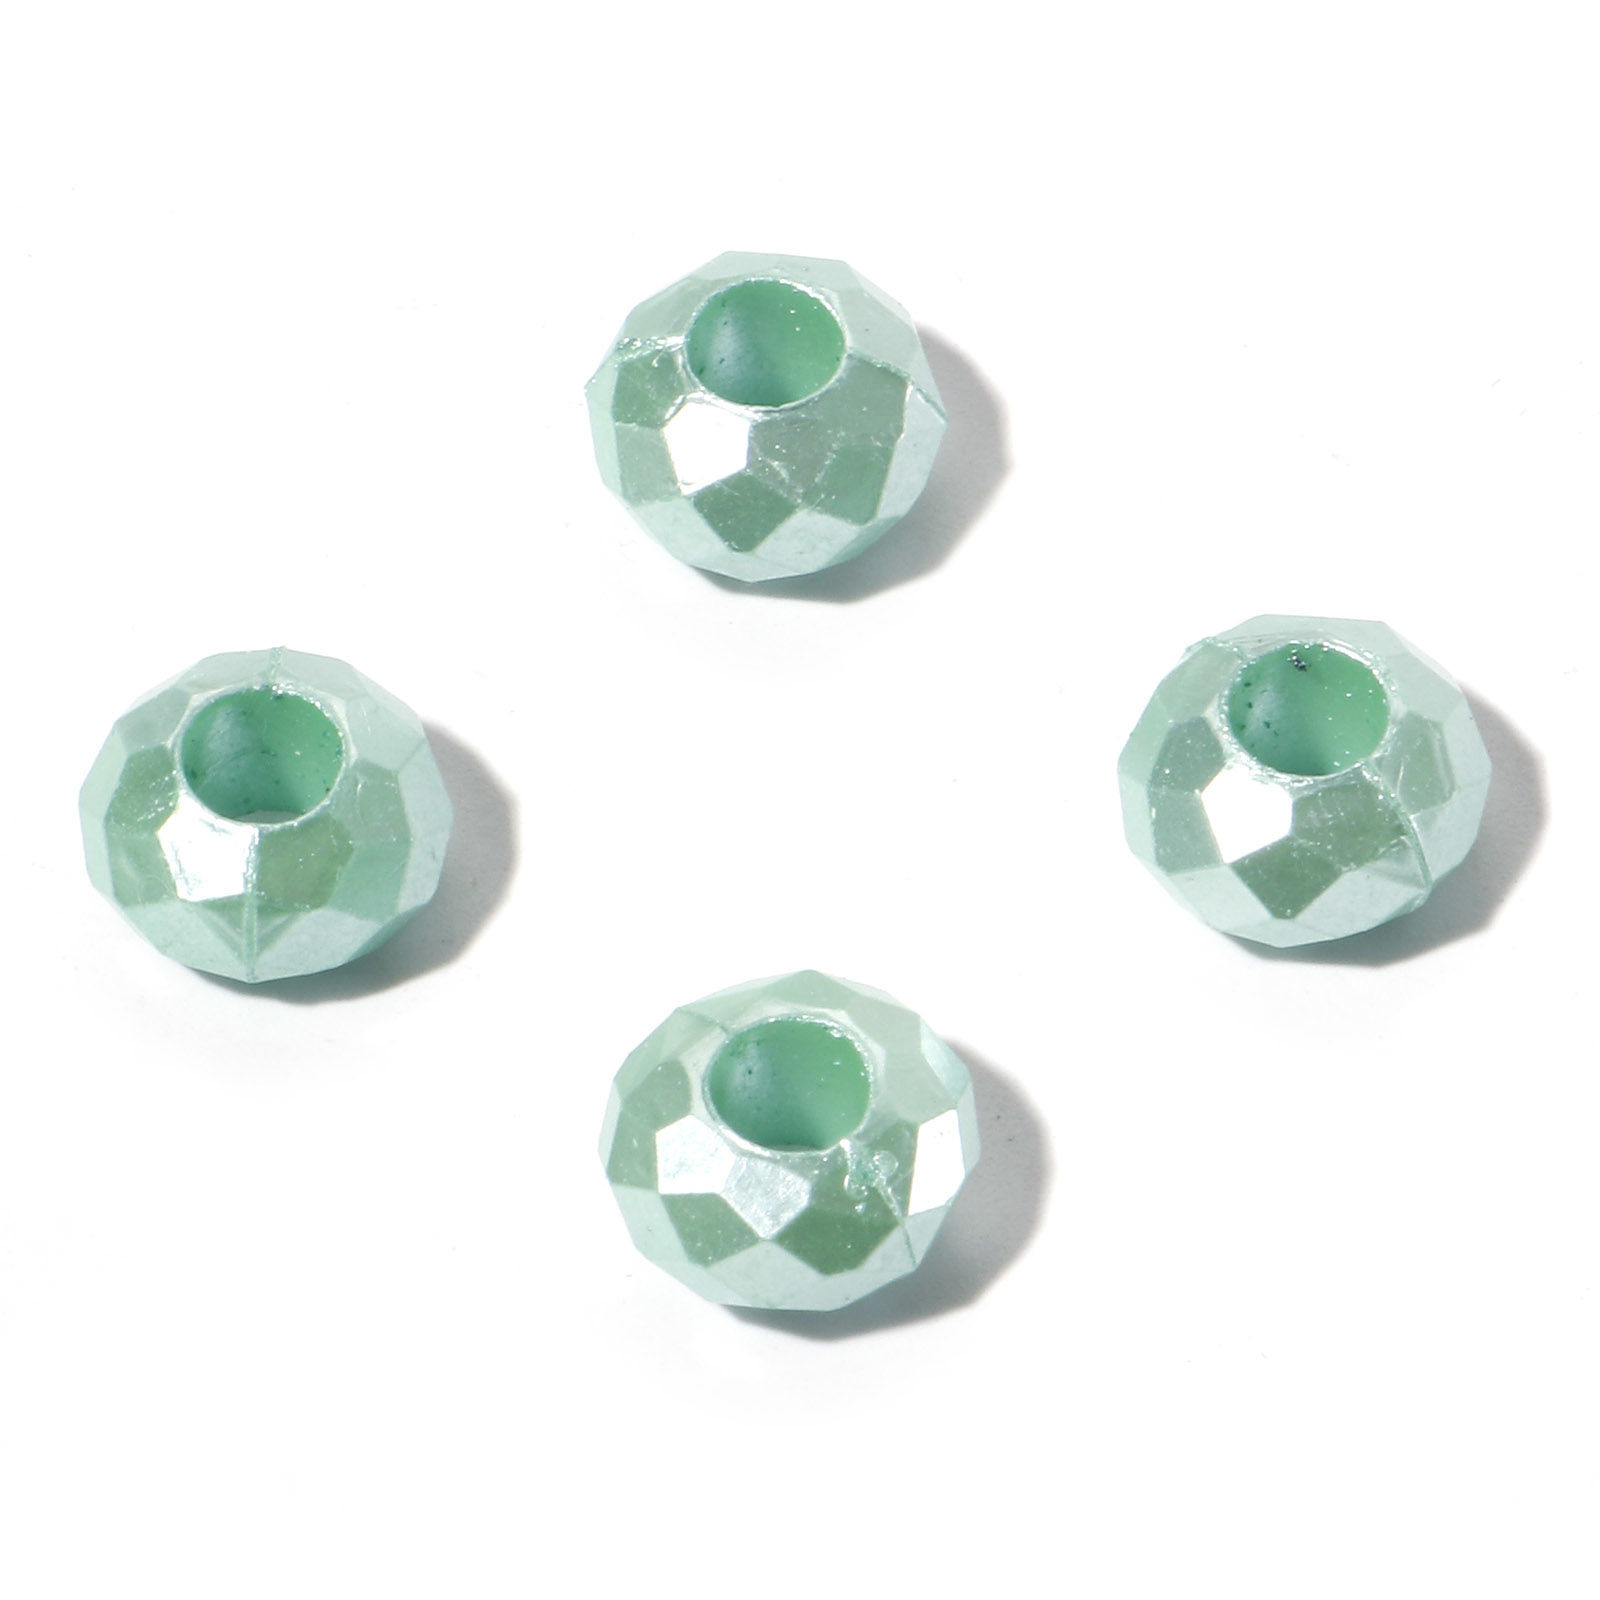 Picture of Acrylic European Style Large Hole Charm Beads Green Round Faceted 12mm Dia., Hole: Approx 4.6mm, 100 PCs